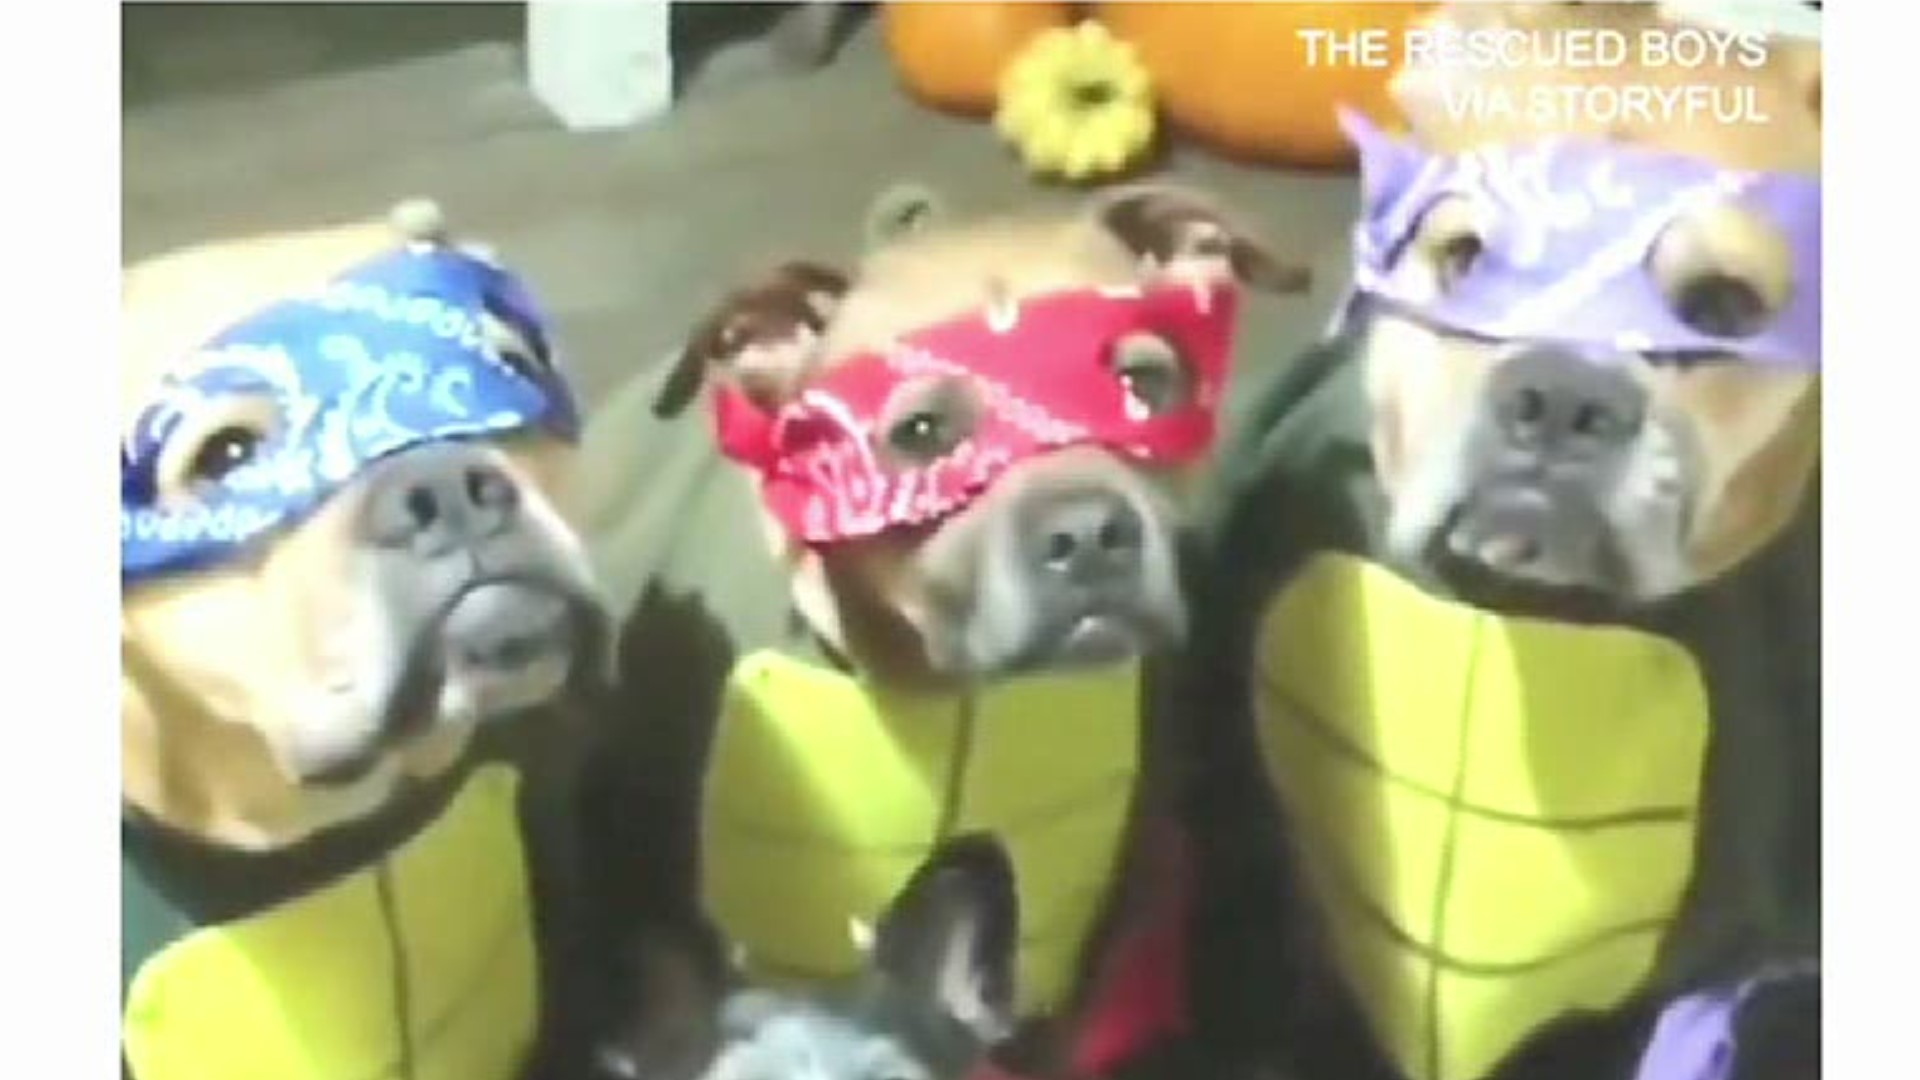 Of course, we humans can’t have all the Halloween fun. On Tuesday, Newswatch 16 is scoped out your cutest, most fun furballs, all decked out in their ghoulish garb.